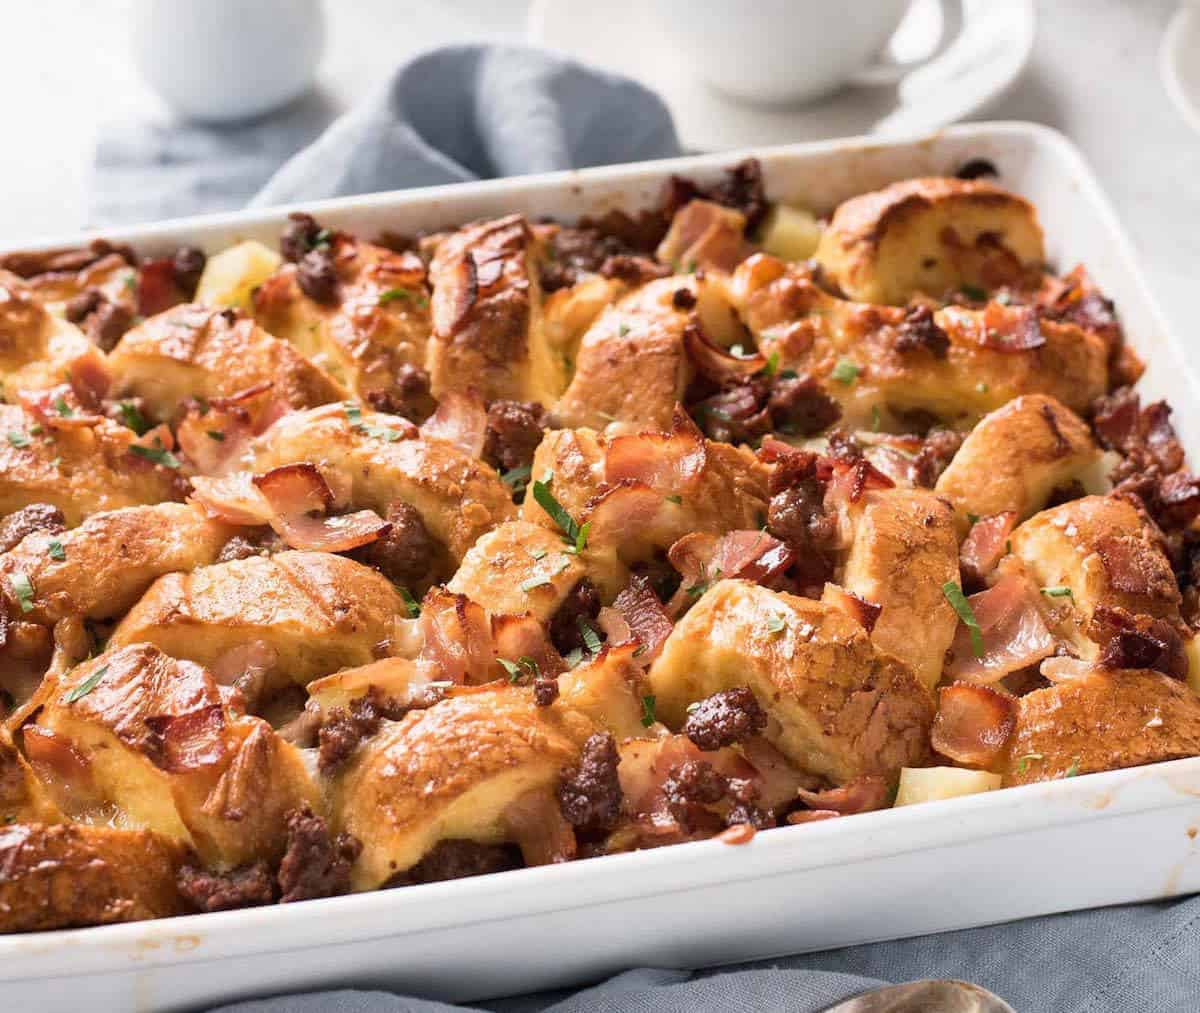 Sausage Bacon Country Breakfast Casserole - Great for feeding a crowd and make ahead. Tastes like a country breakfast fry up!